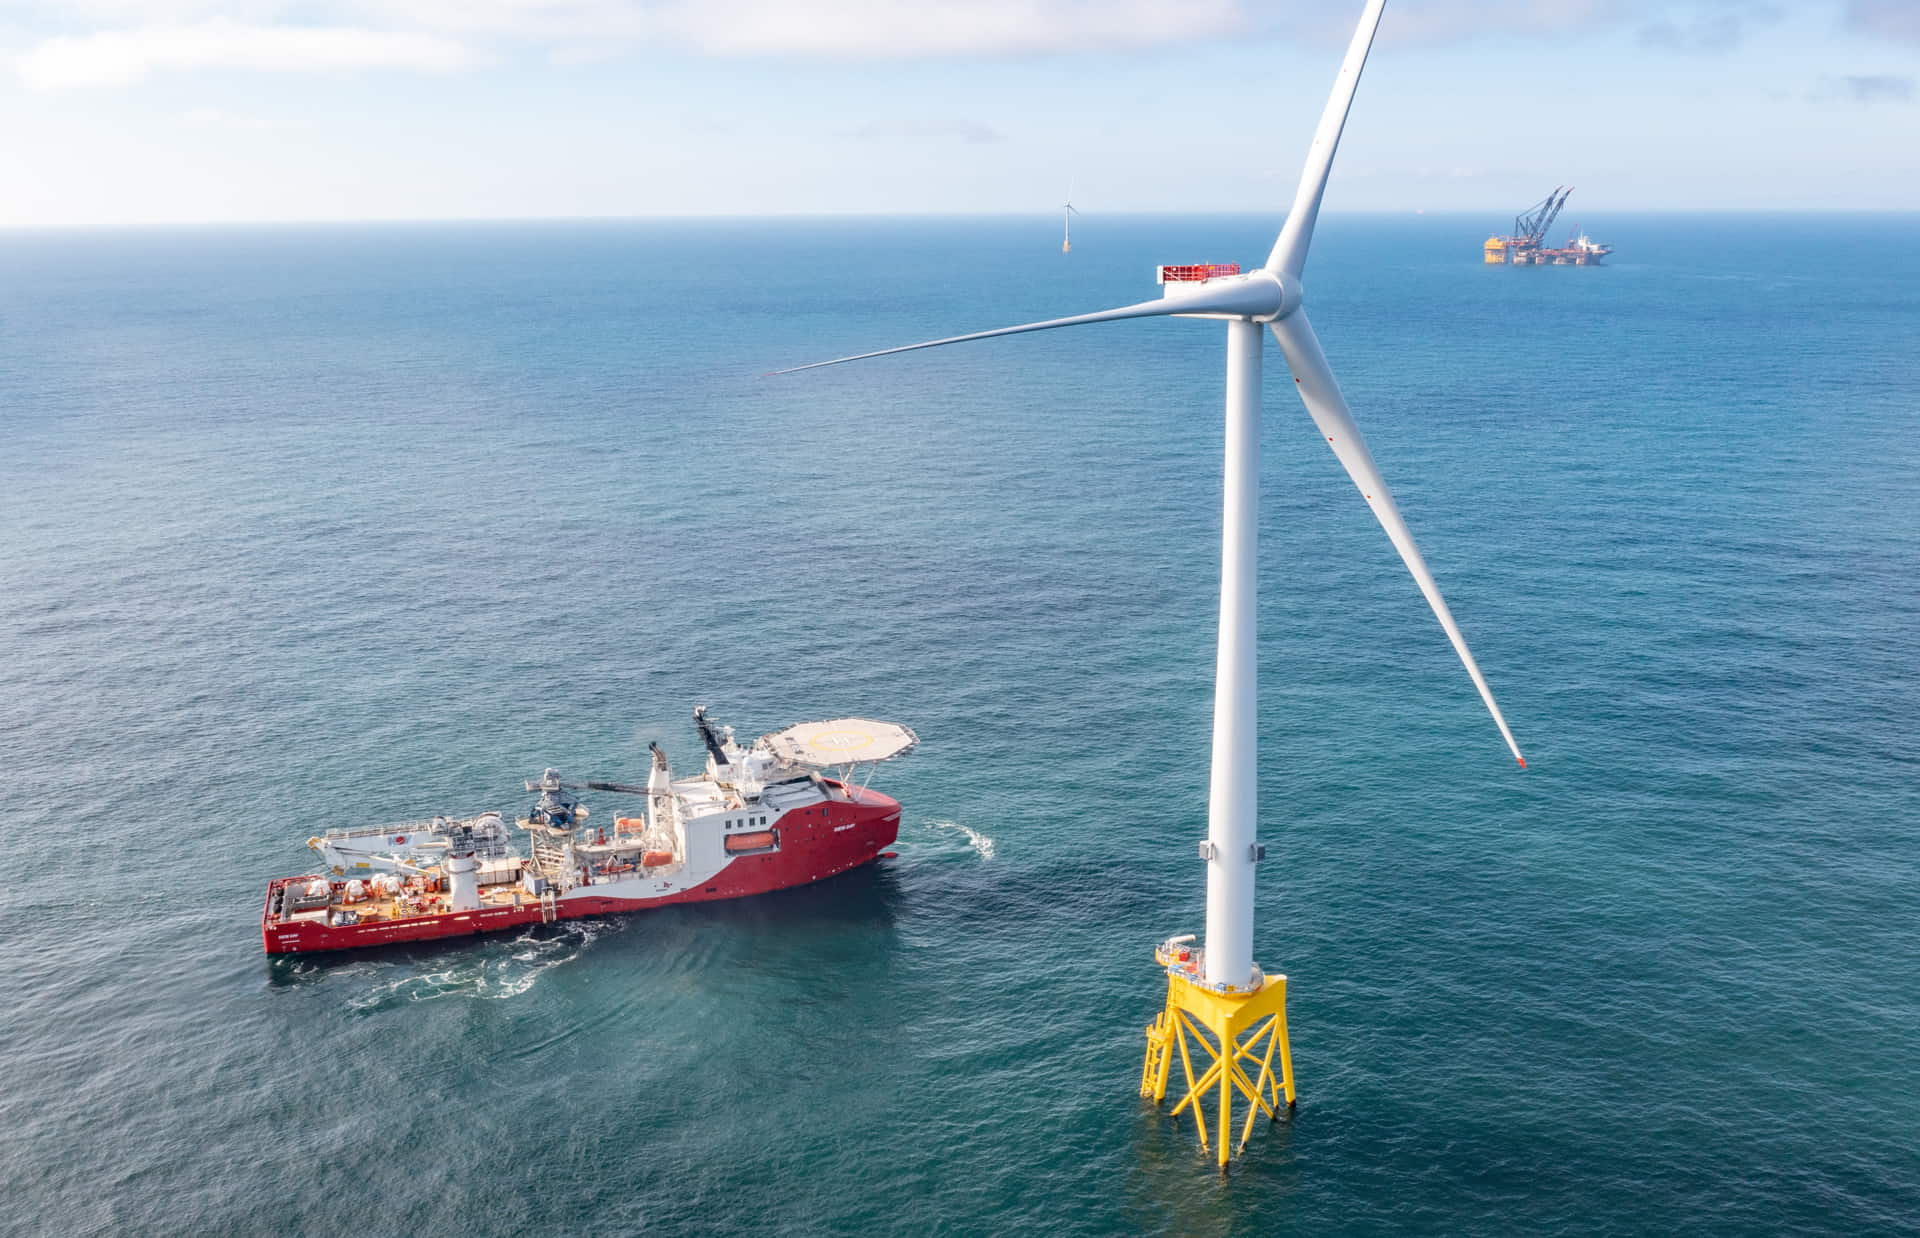 A photo of a wind turbine during commissioning at Seagreen offshore wind farm